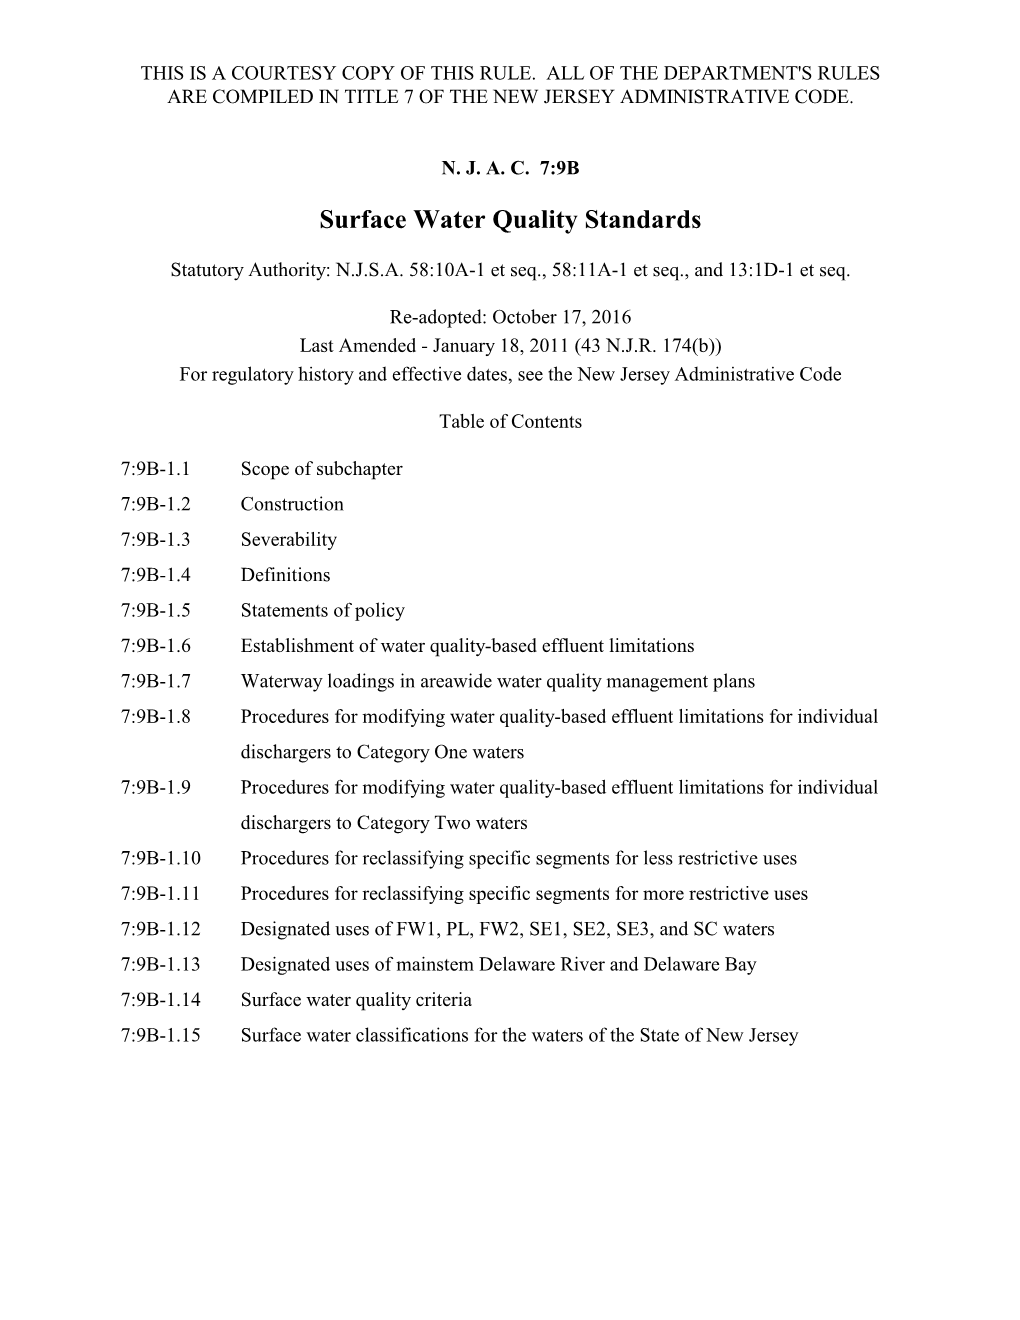 N.J.A.C. 7:9B Surface Water Quality Standards